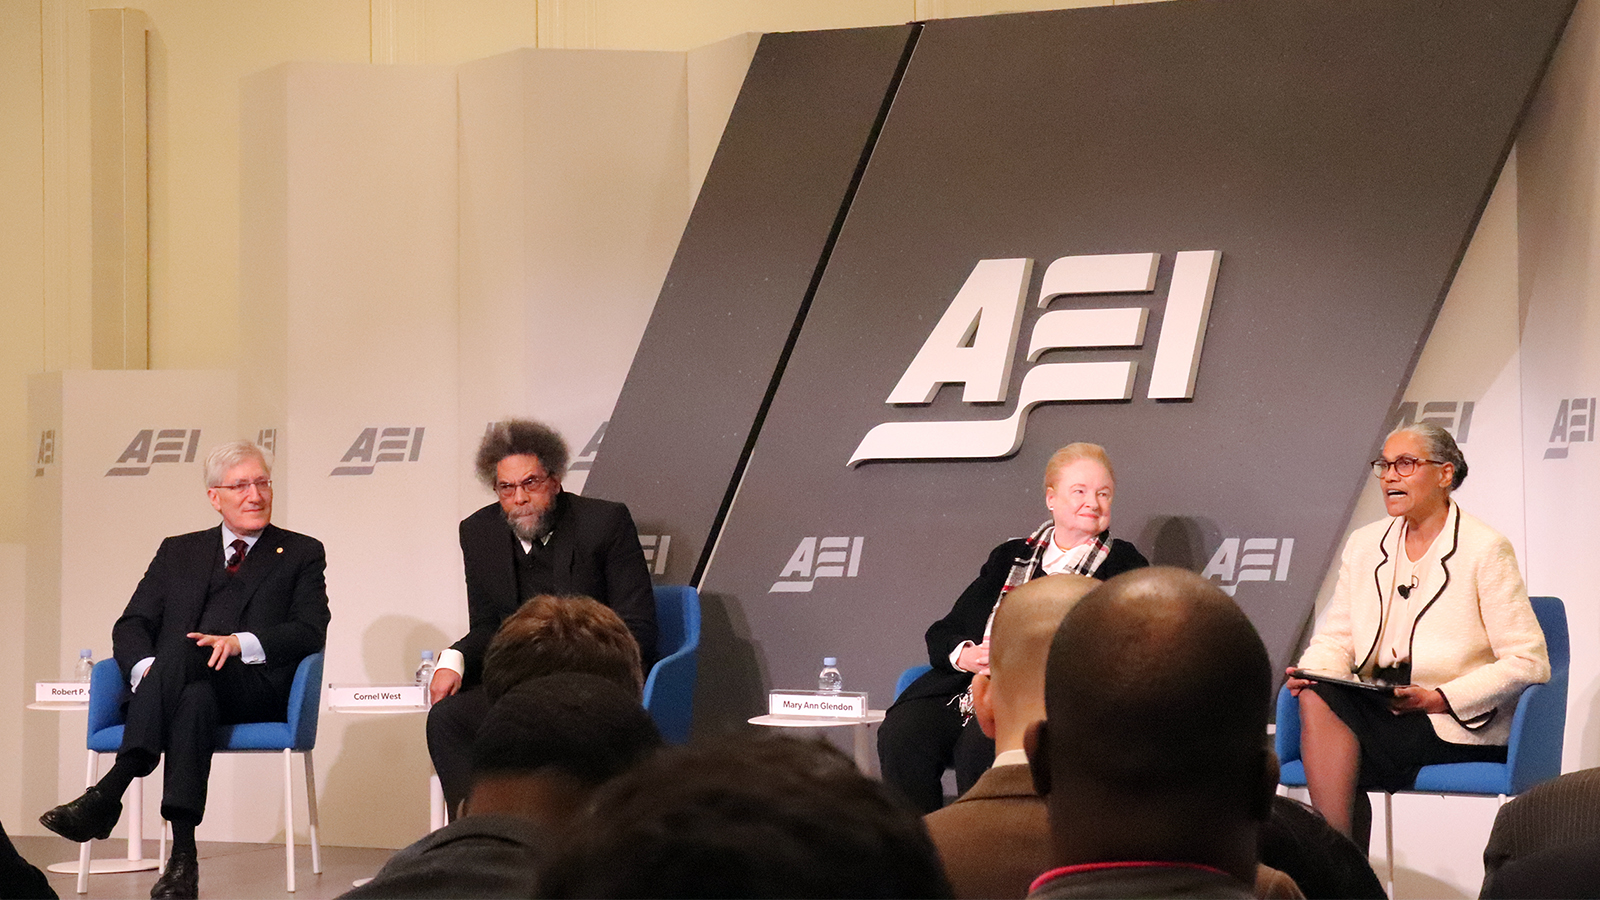 Robert P. George, from left, Cornel West, Mary Ann Glendon and moderator Jacqueline C. Rivers at the American Enterprise Institute on Friday, Jan. 6, 2023, in Washington. RNS photo by Adelle M. Banks